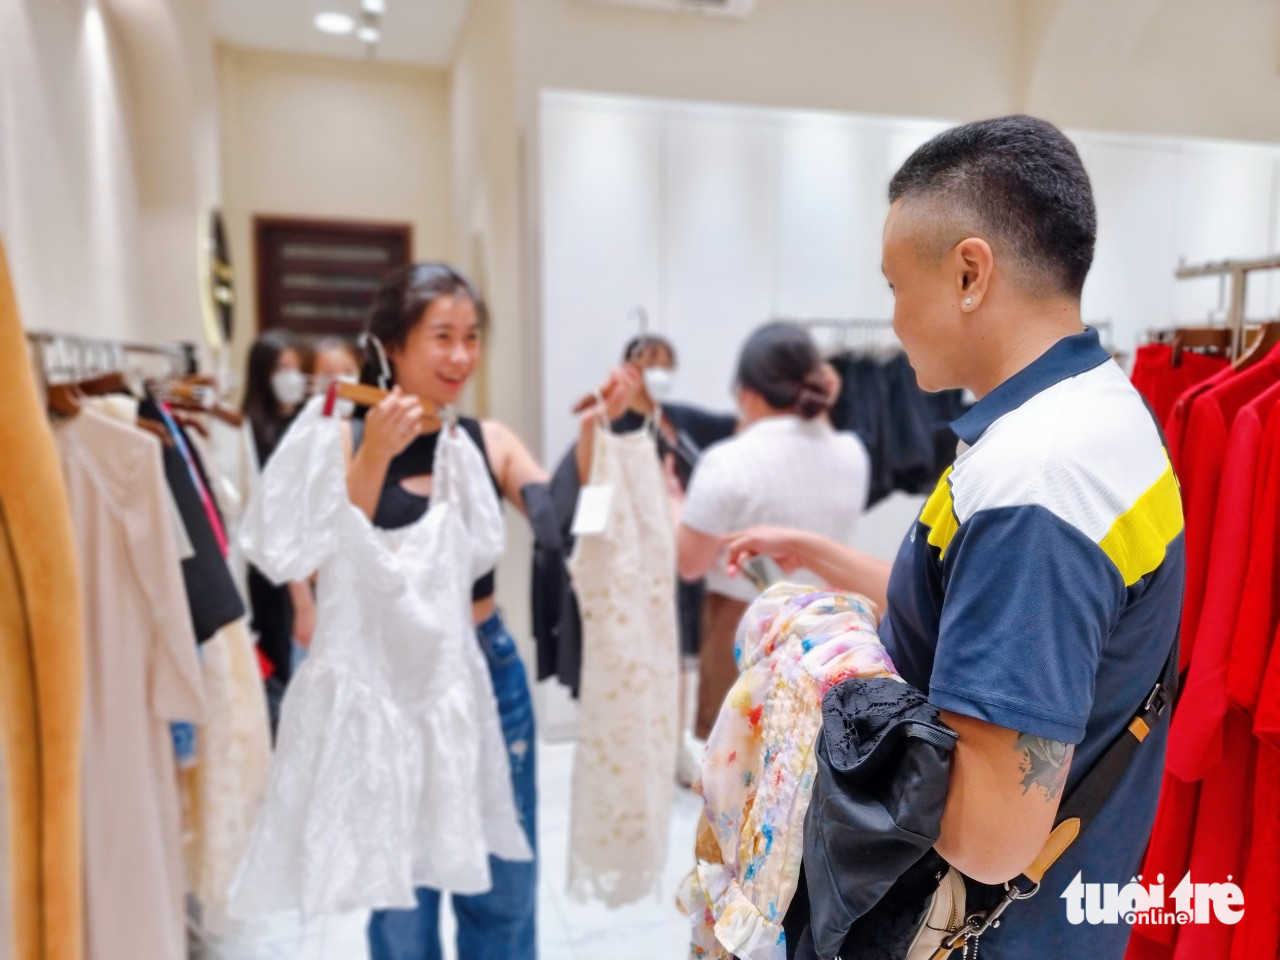 Tran Quoc Thinh accompanies his fiancé during a clothes shopping trip on Nguyen Trai Street in District 1, Ho Chi Minh City, January 2023. Photo: Nhat Xuan / Tuoi Tre